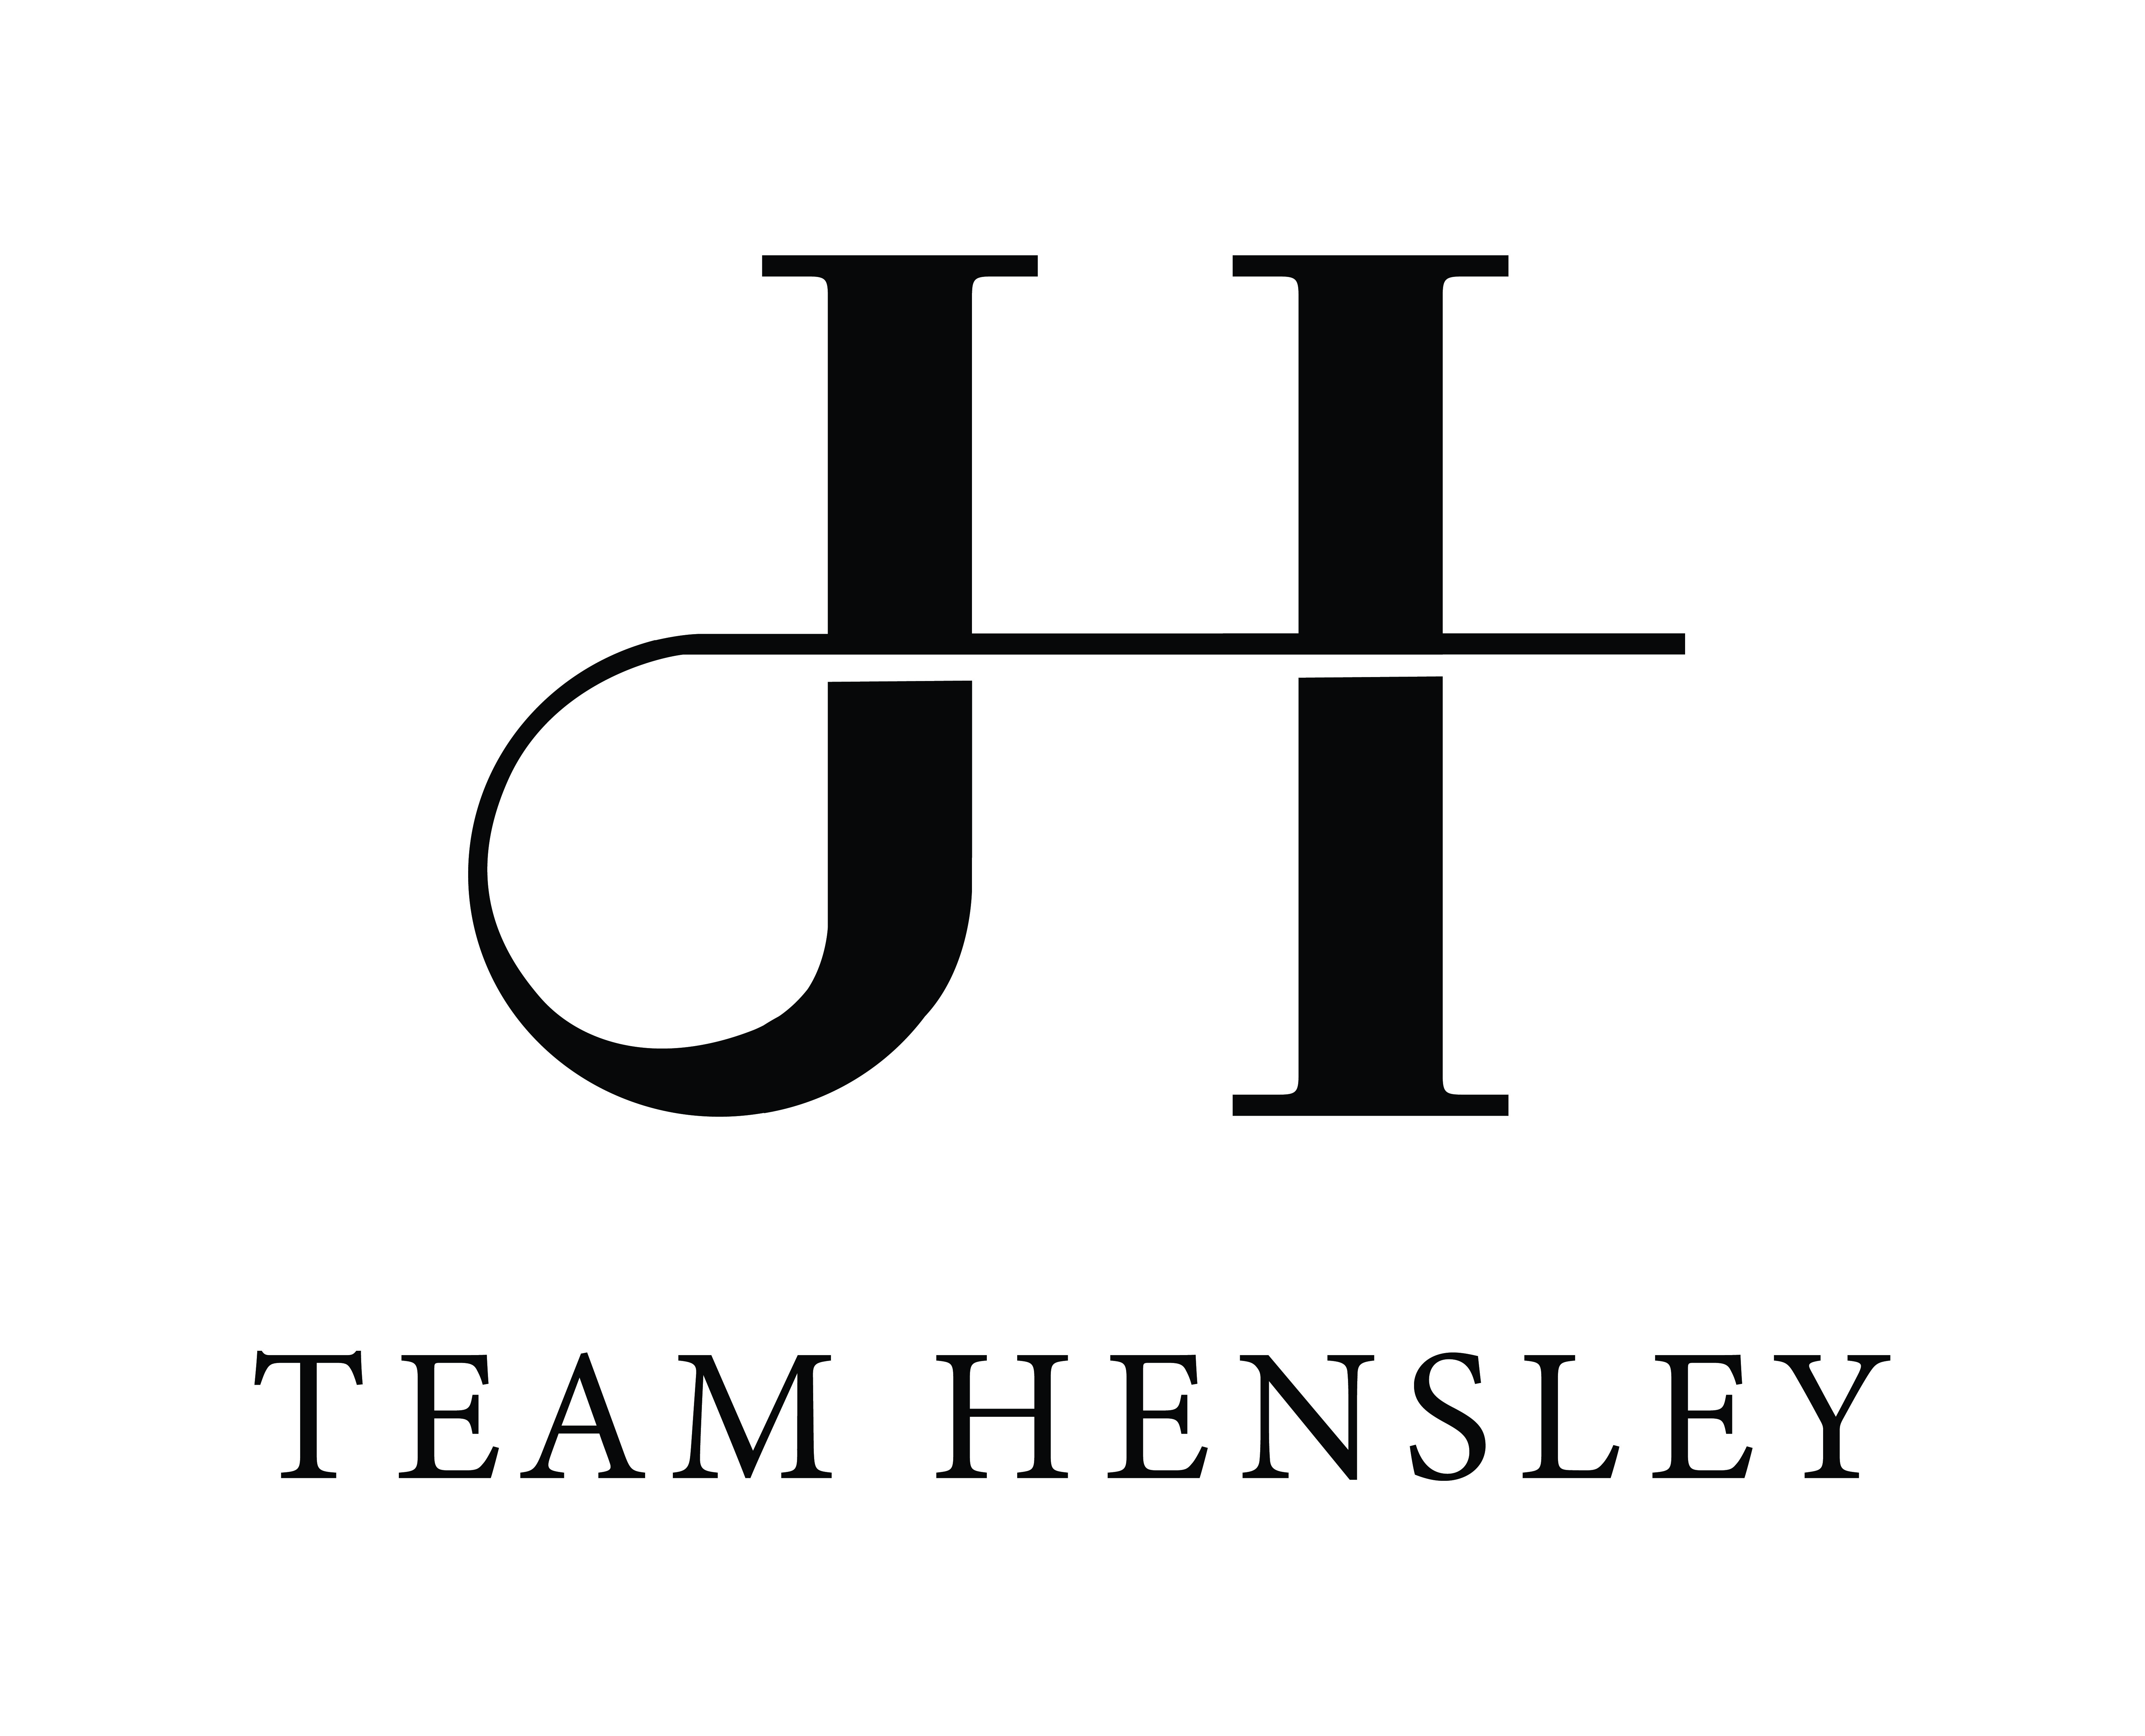 A text banner for Team Hensley